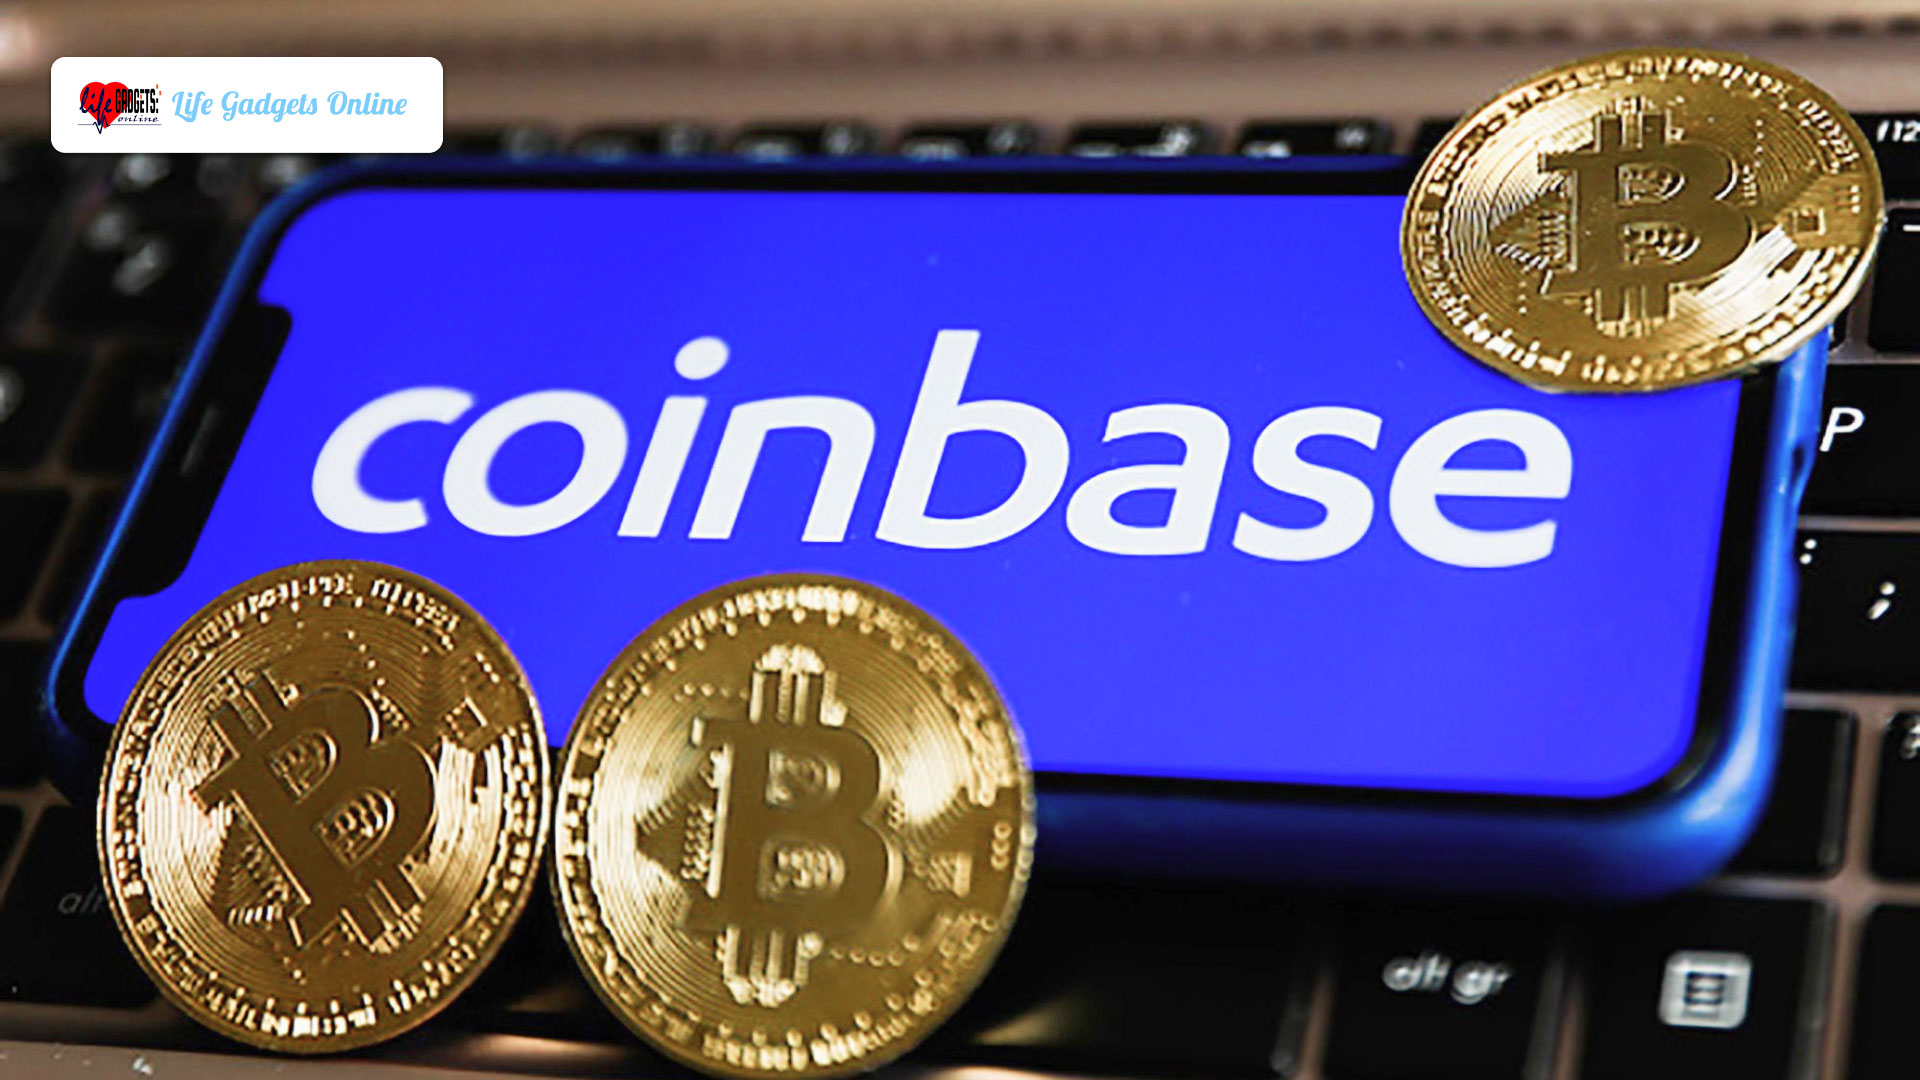 How To Make Money On Coinbase?